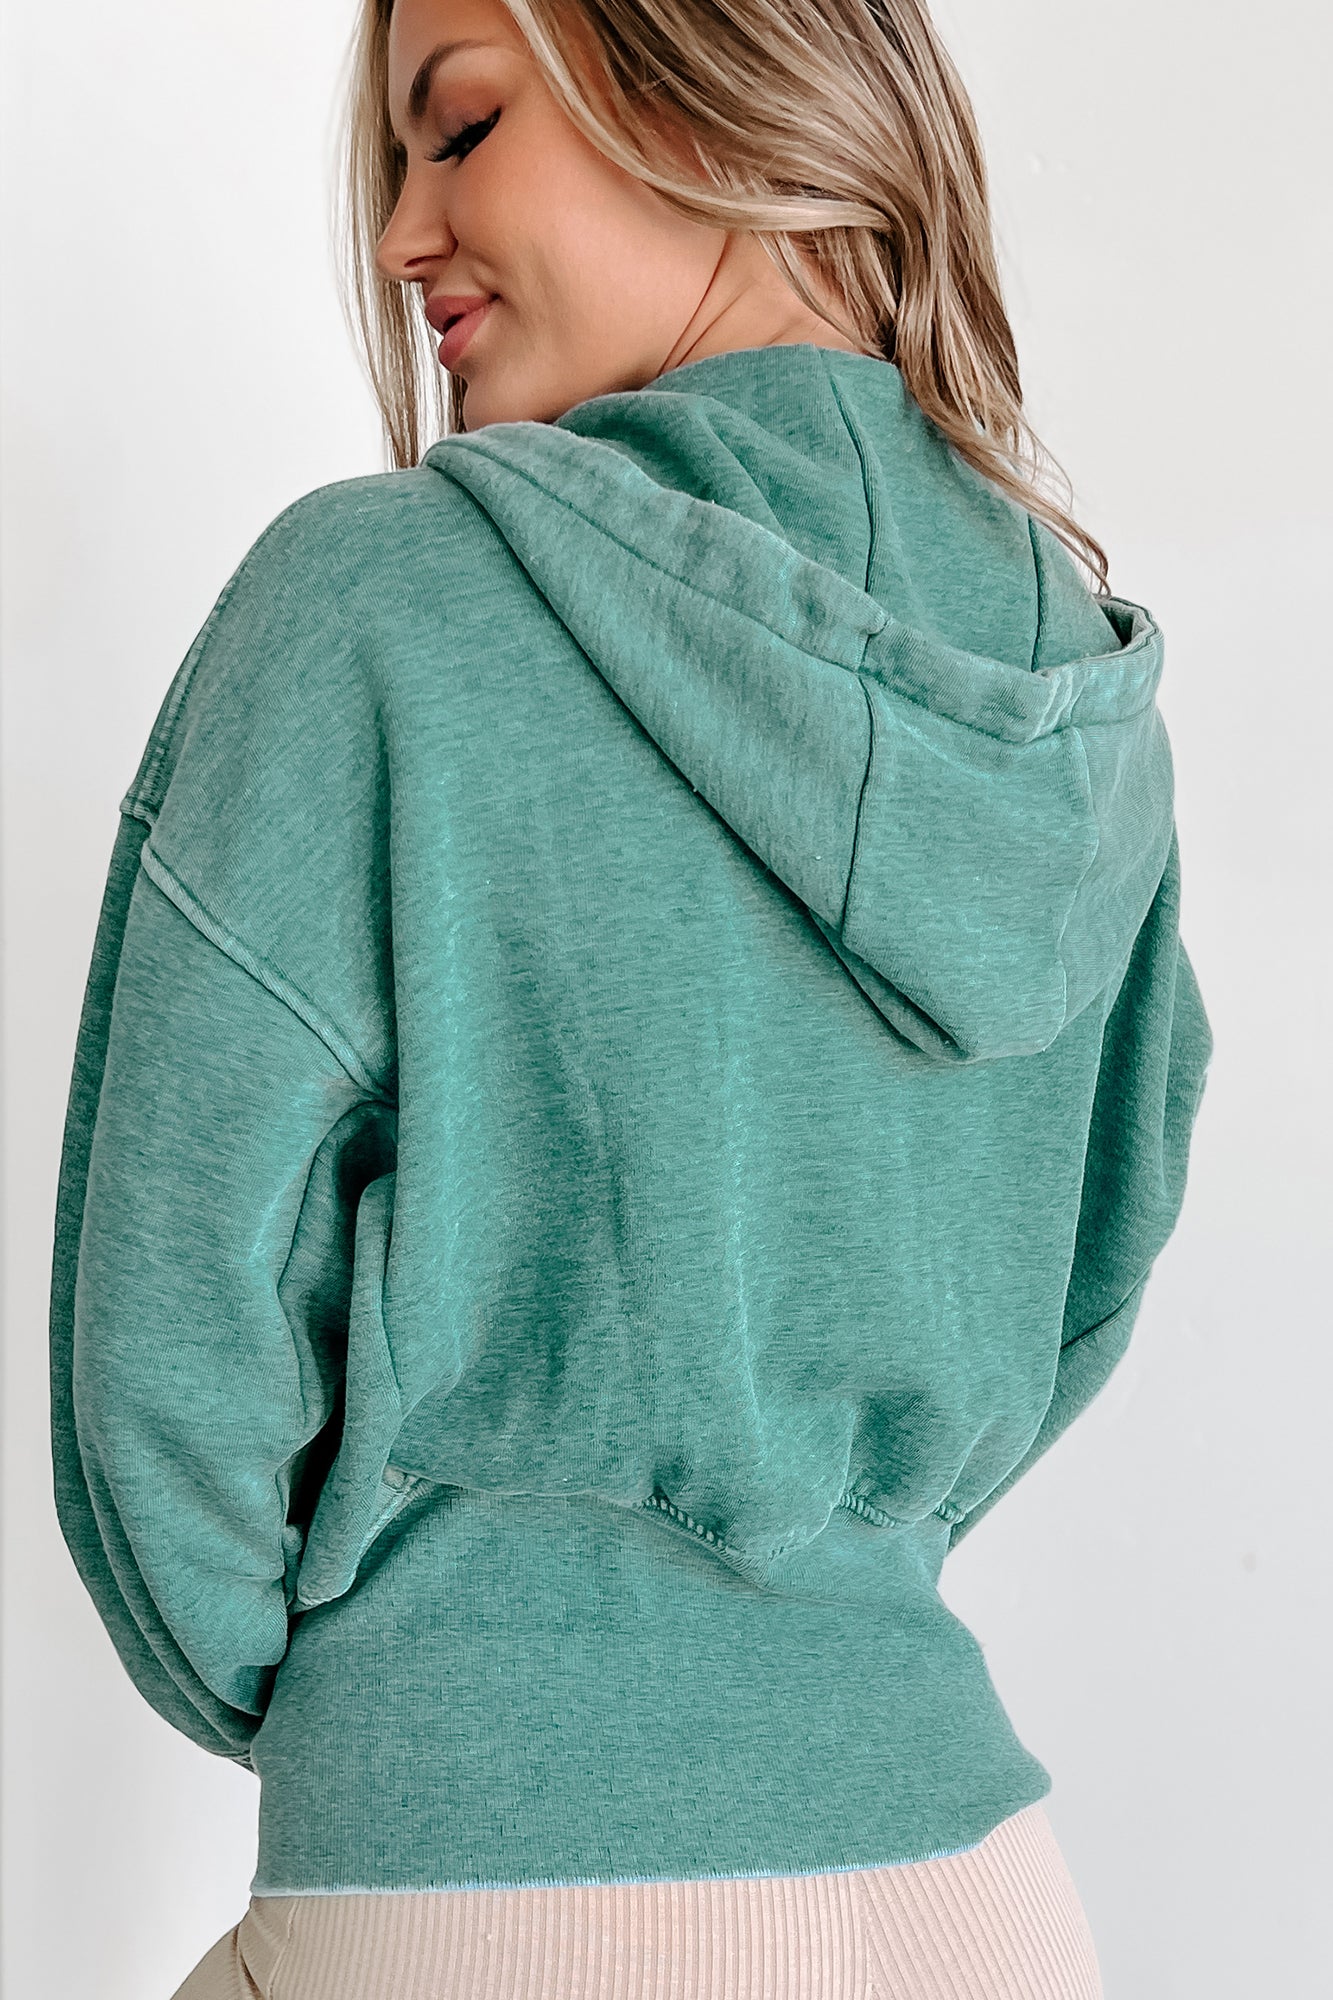 Completely Content Zip-Up Hoodie (Blue Palm) - NanaMacs